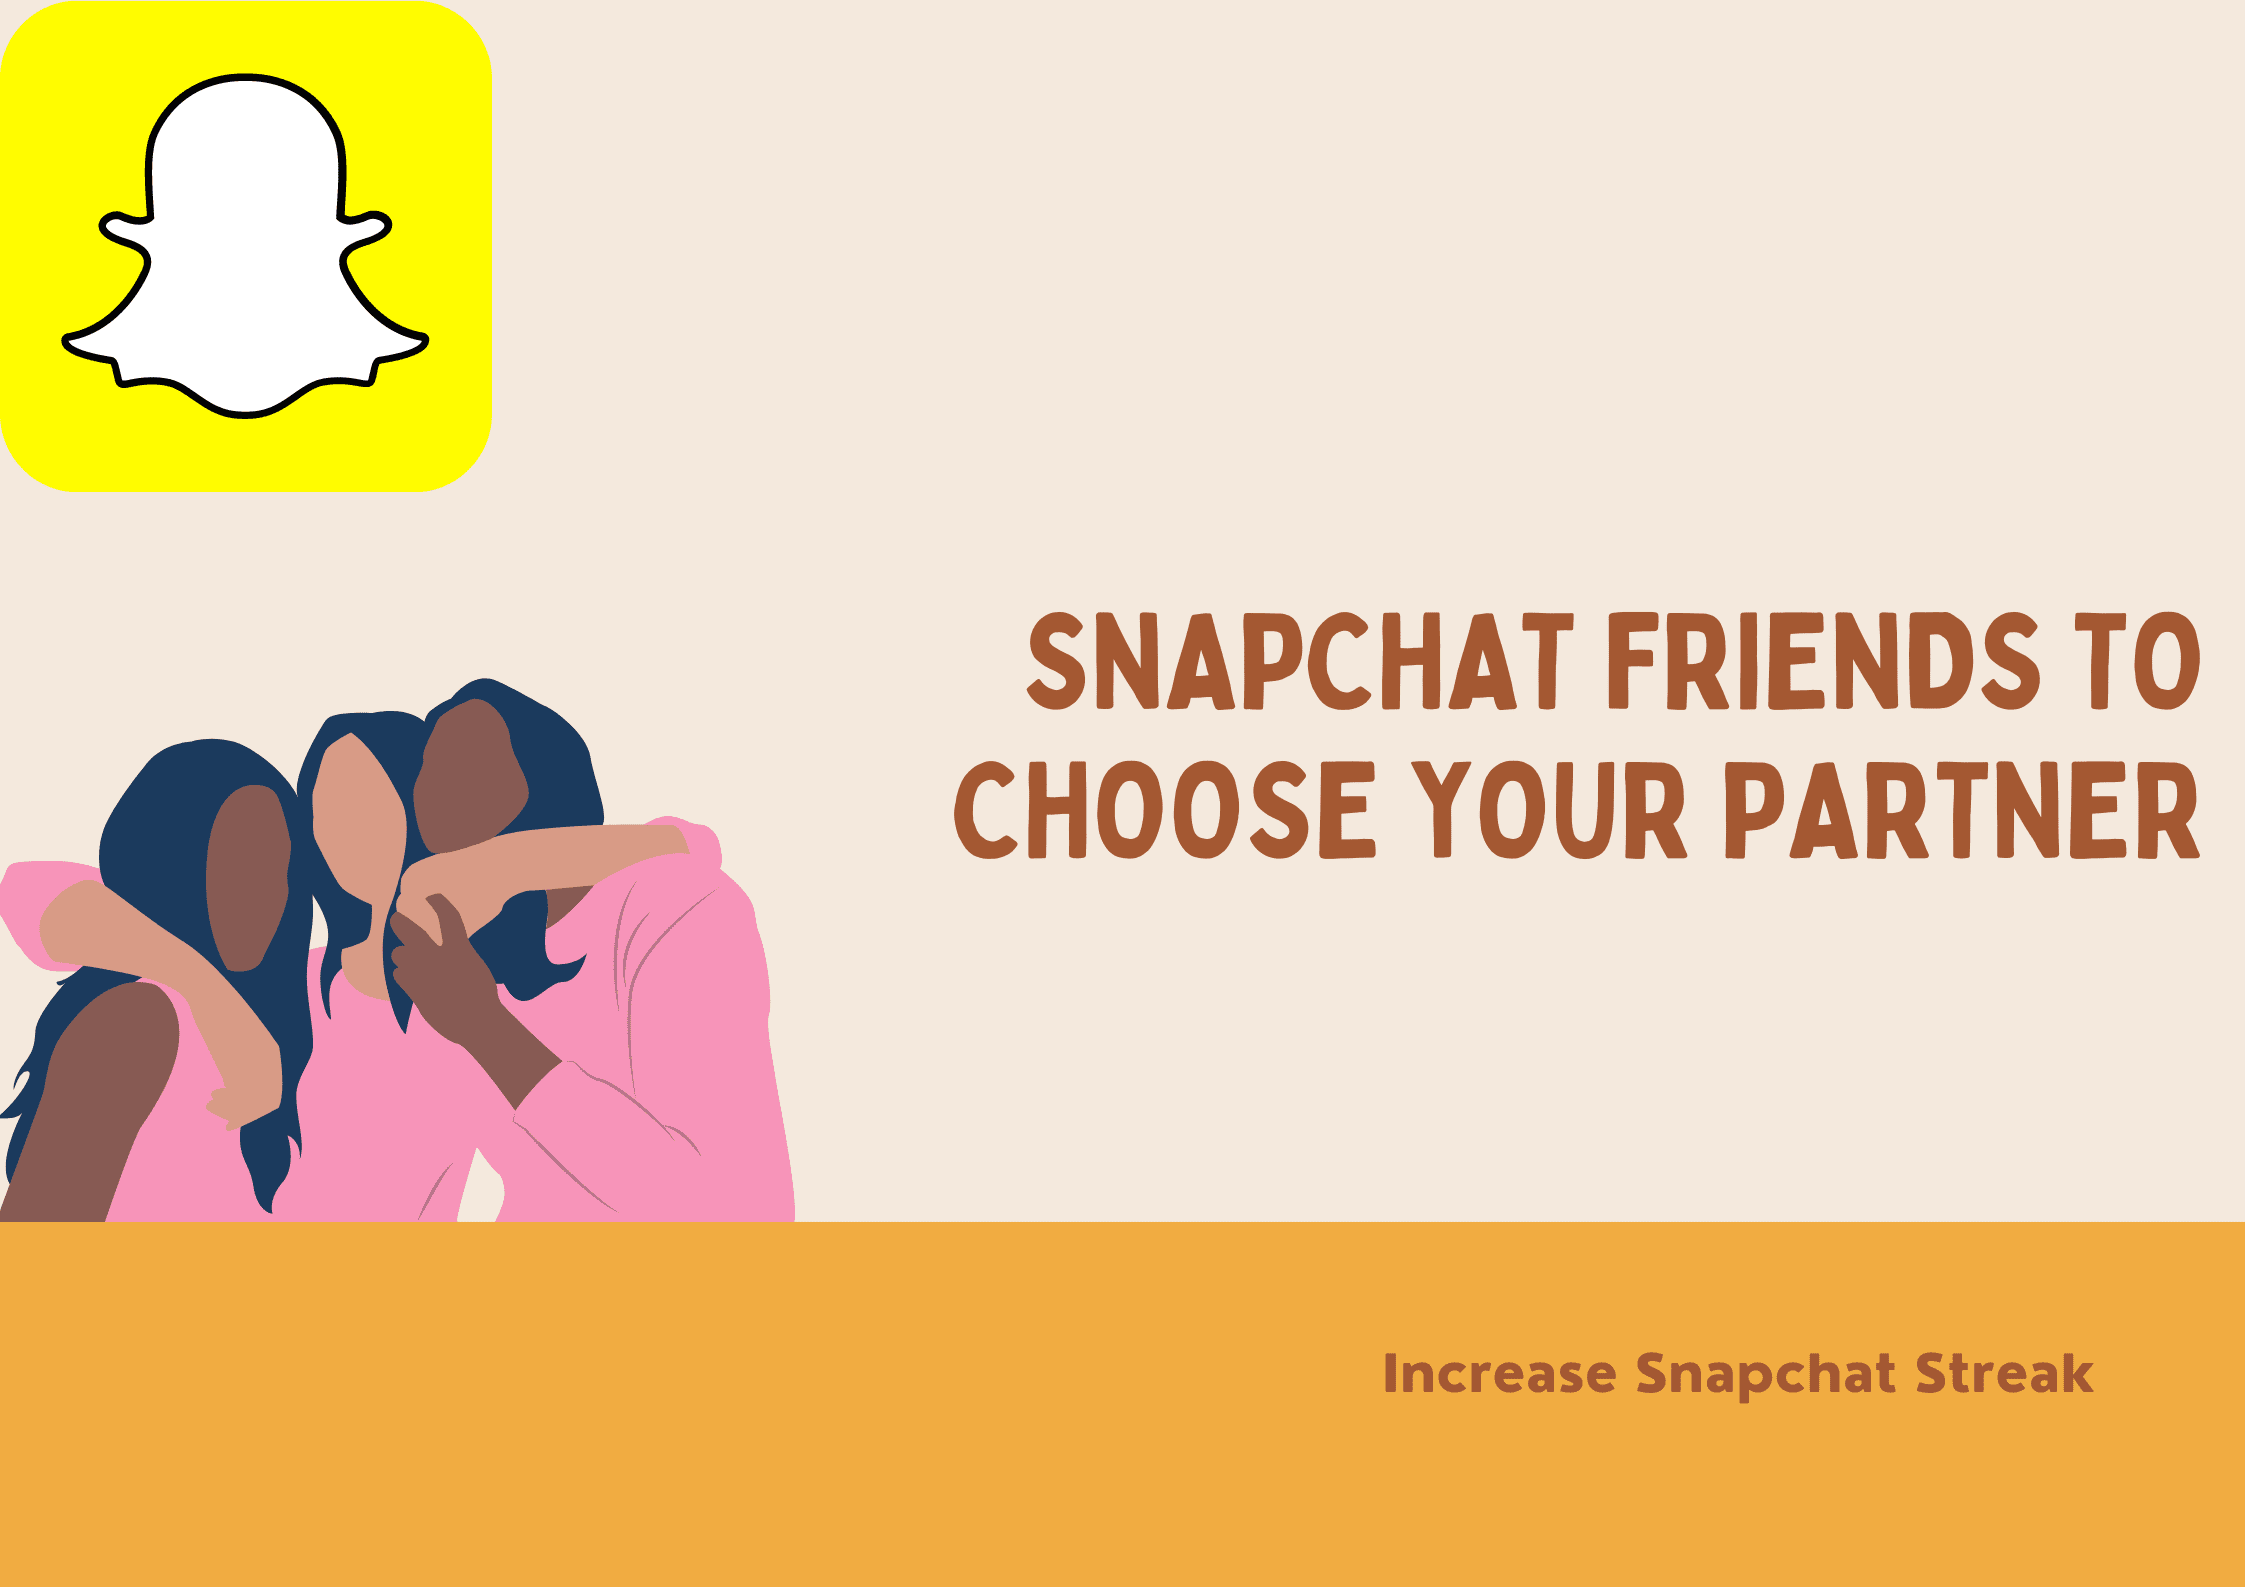 Snapchat friends to choose your partner